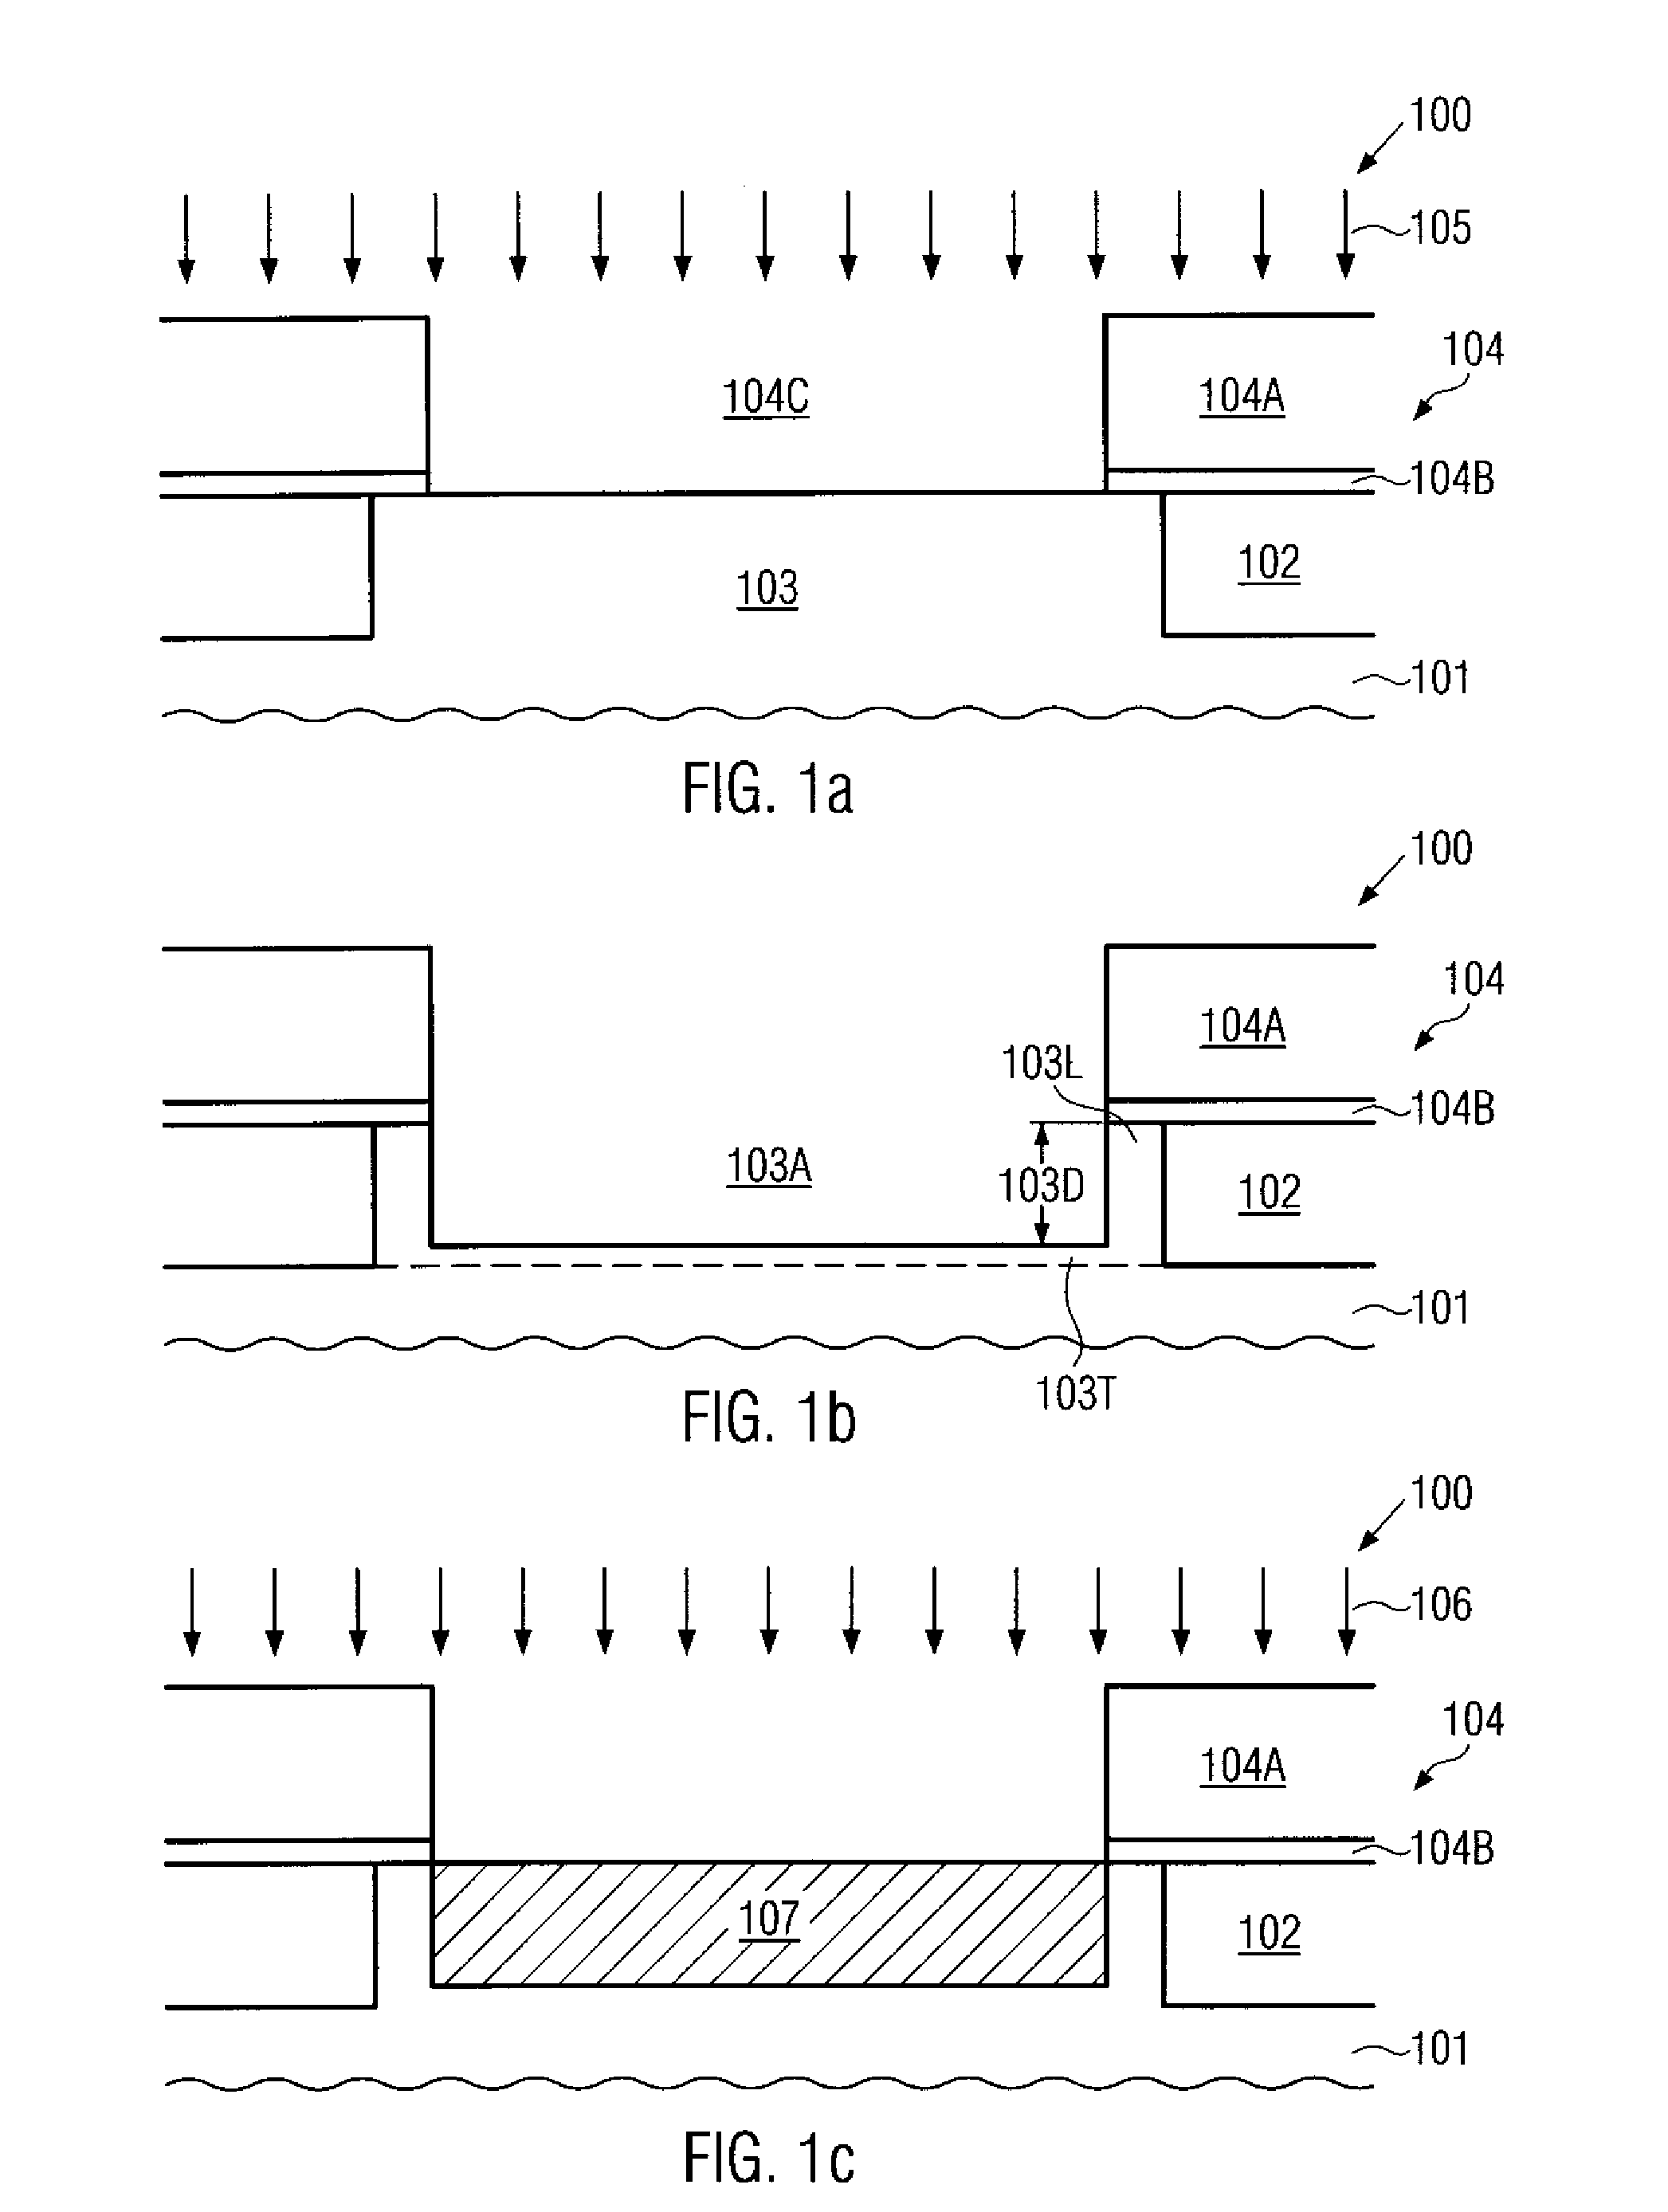 Formation of transistor having a strained channel region including a performance enhancing material composition utilizing a mask pattern